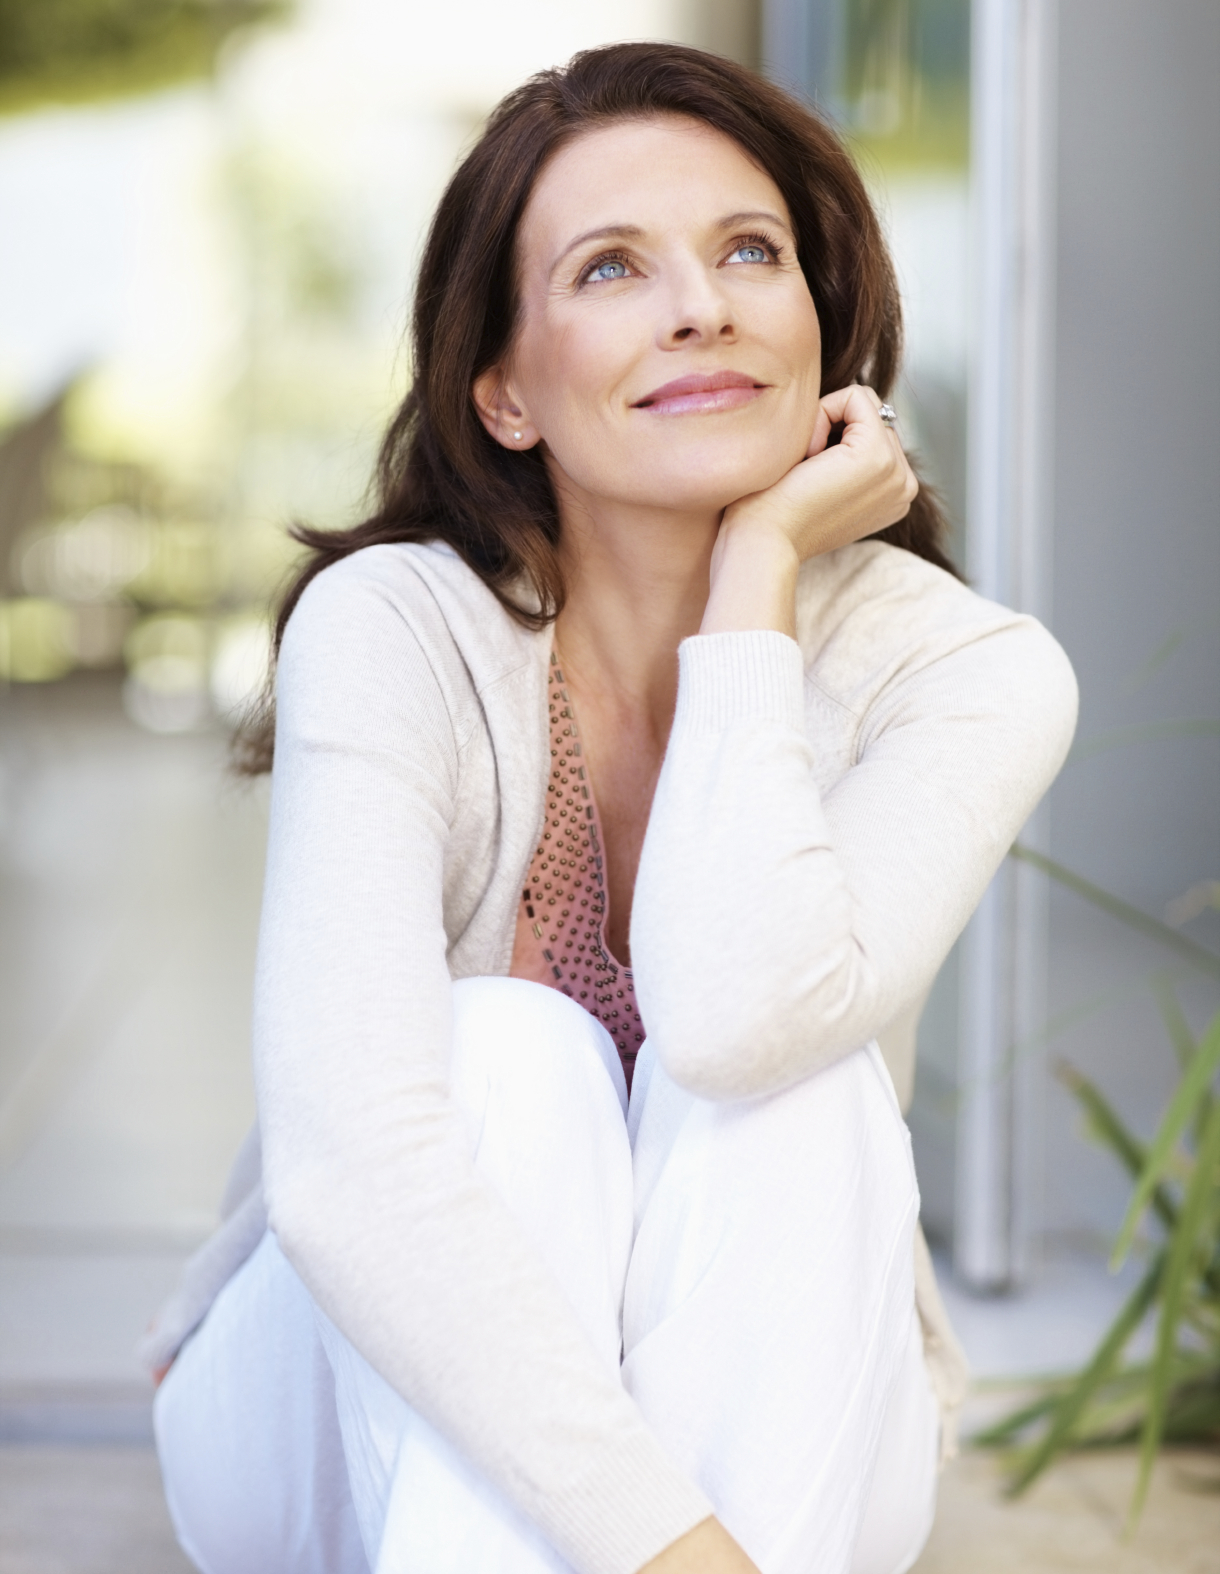 Lovely Mature Woman Looking Away In Thought